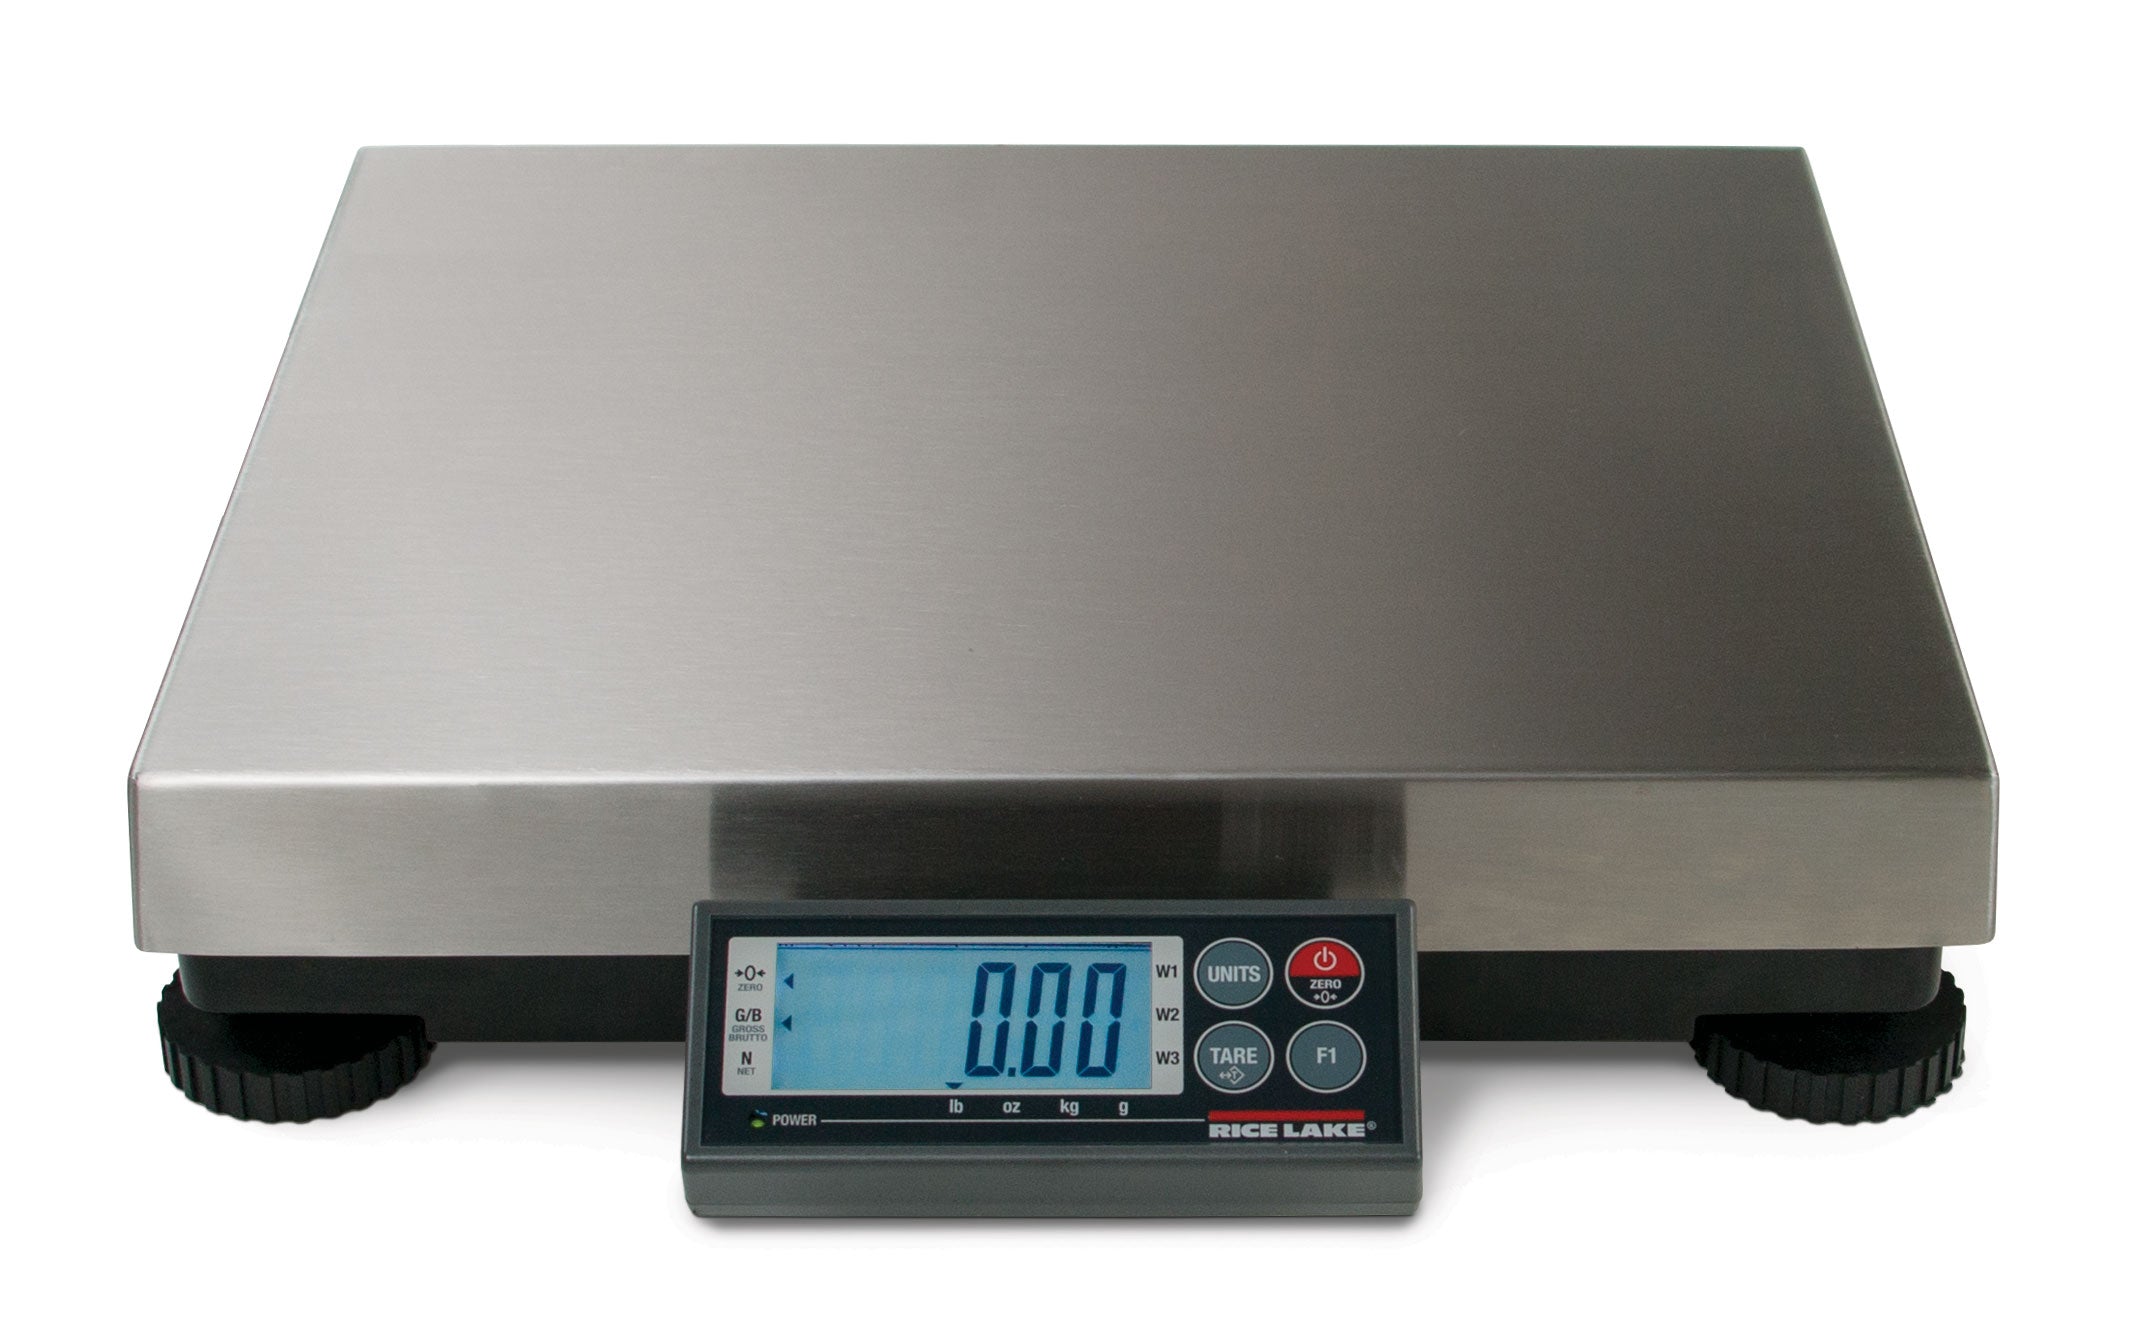 Rice Lake 182395 300 x 0.1 lb/150 x 0.05kg, BP 2020-150S Shipping Digital Scale, SS Weight Platter with 2 years Warranty